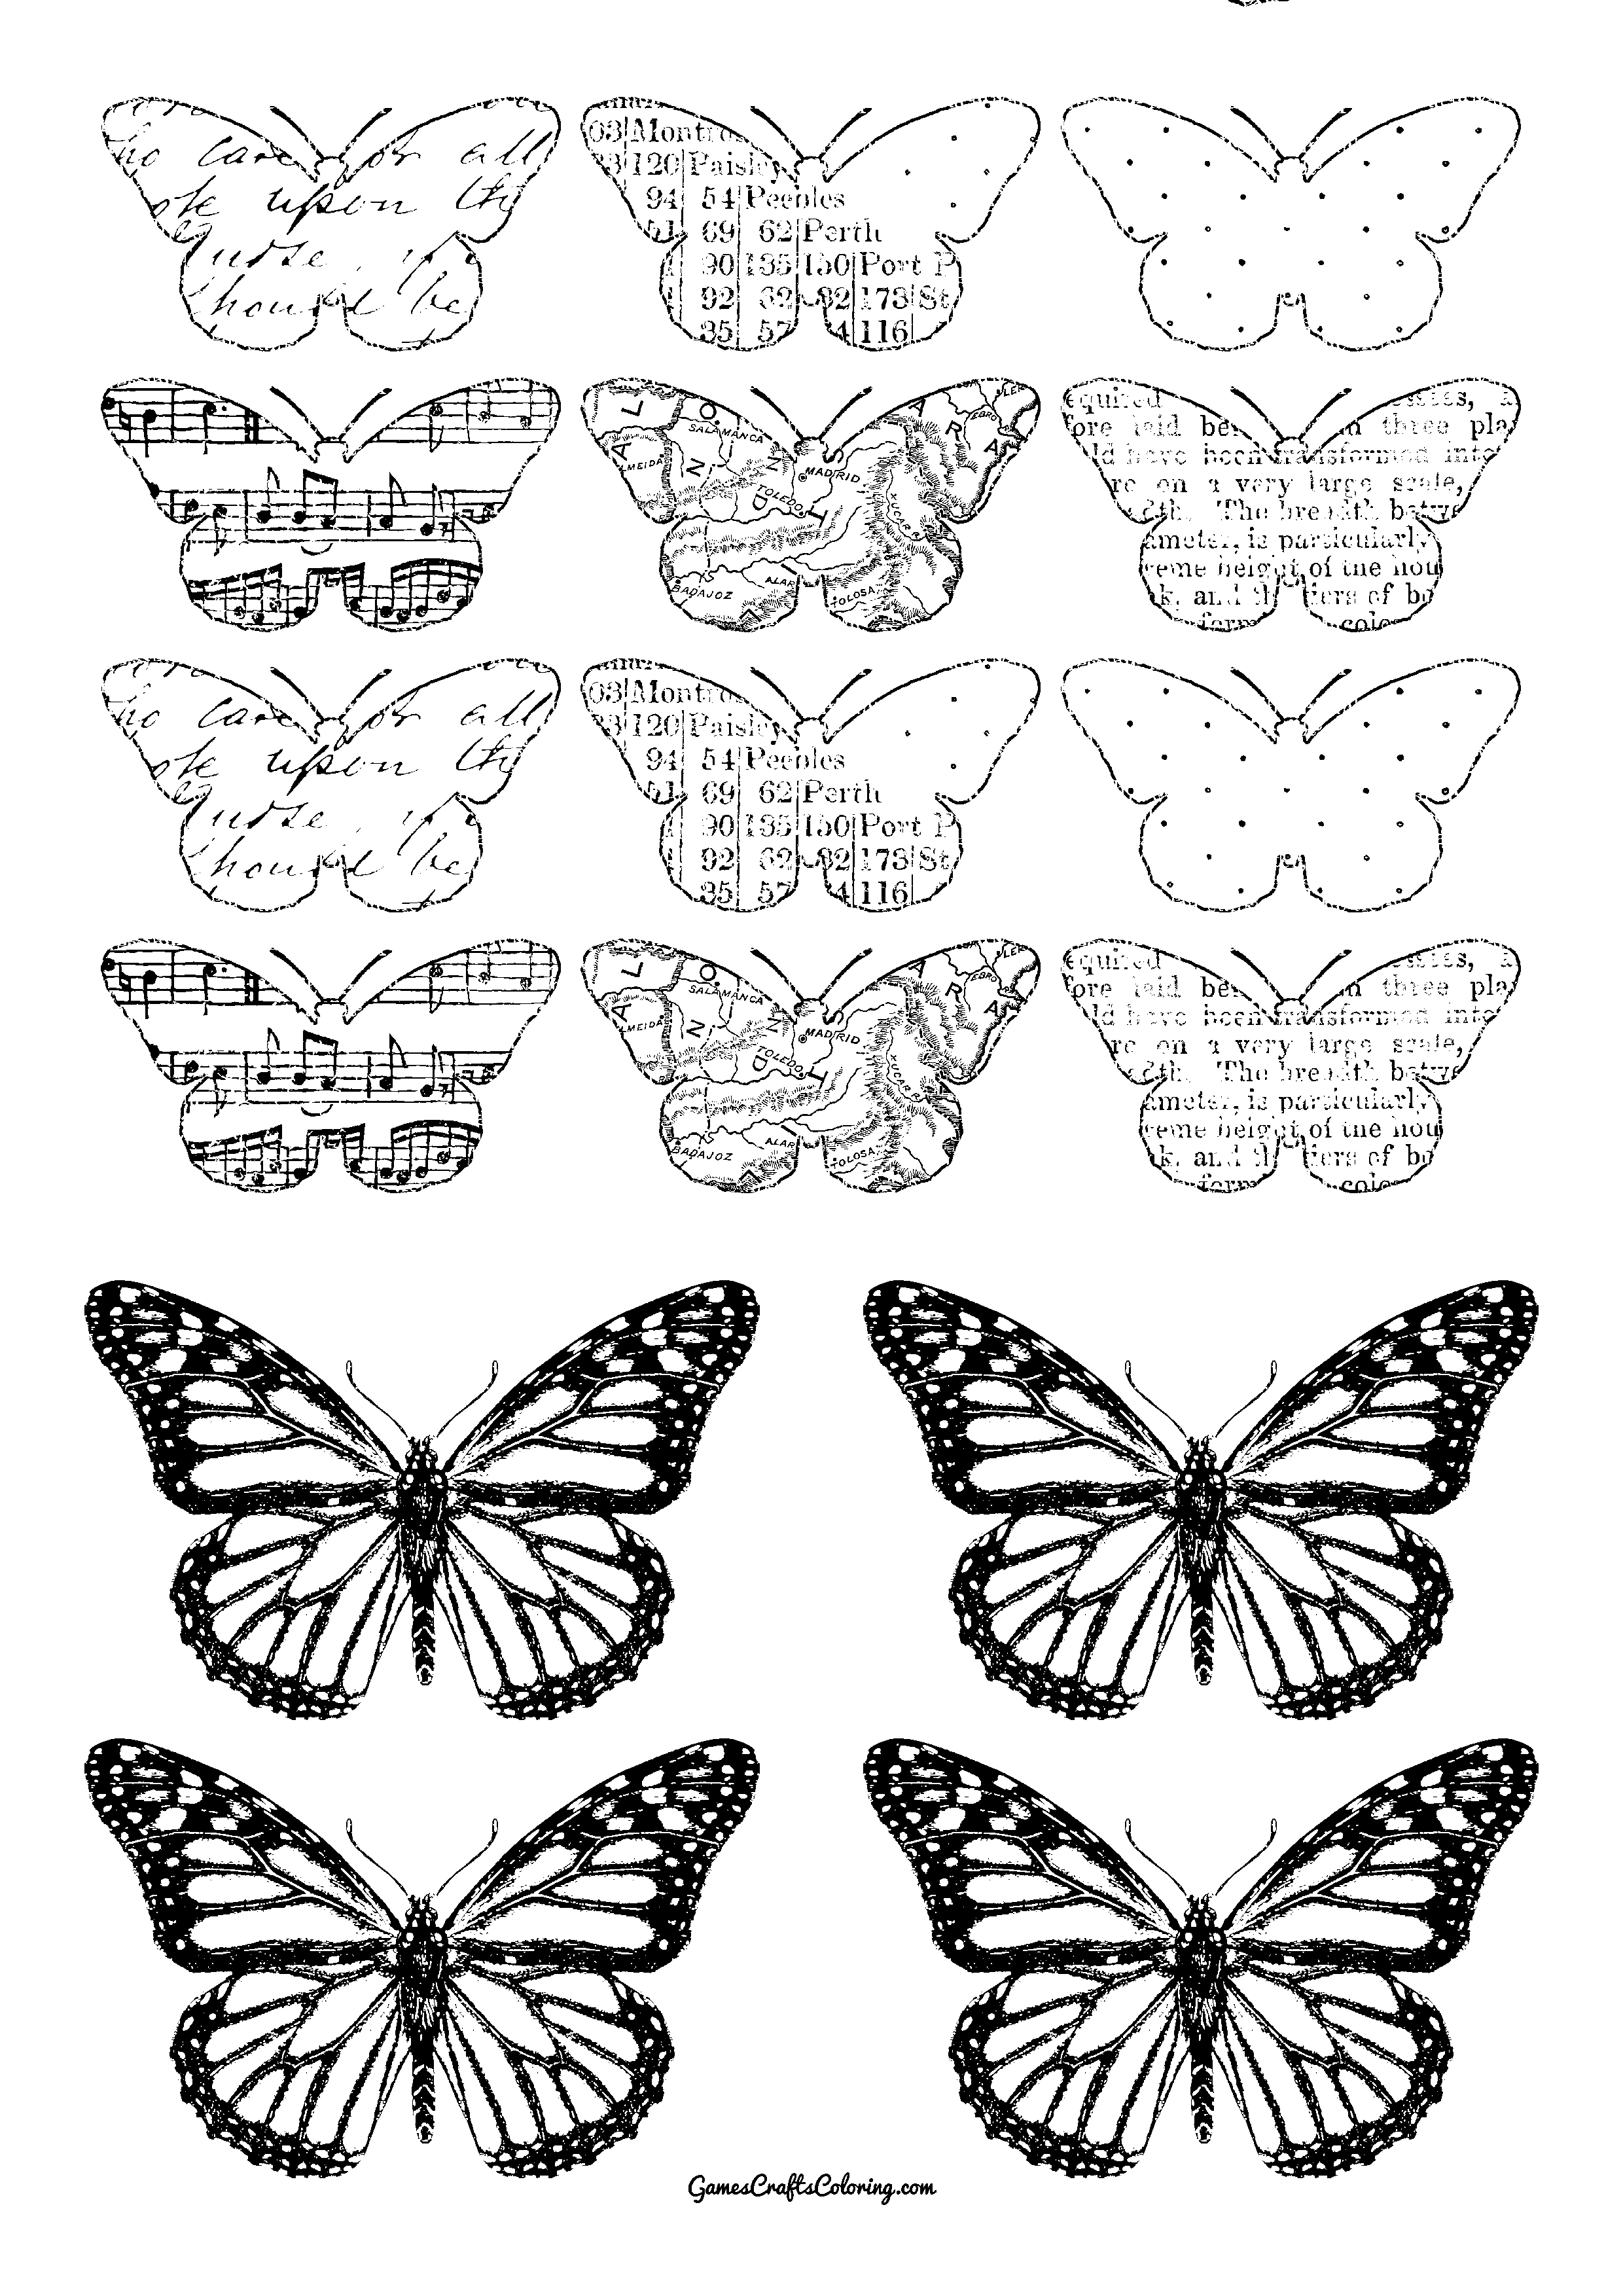 gcc printable butterflies and old handwriting